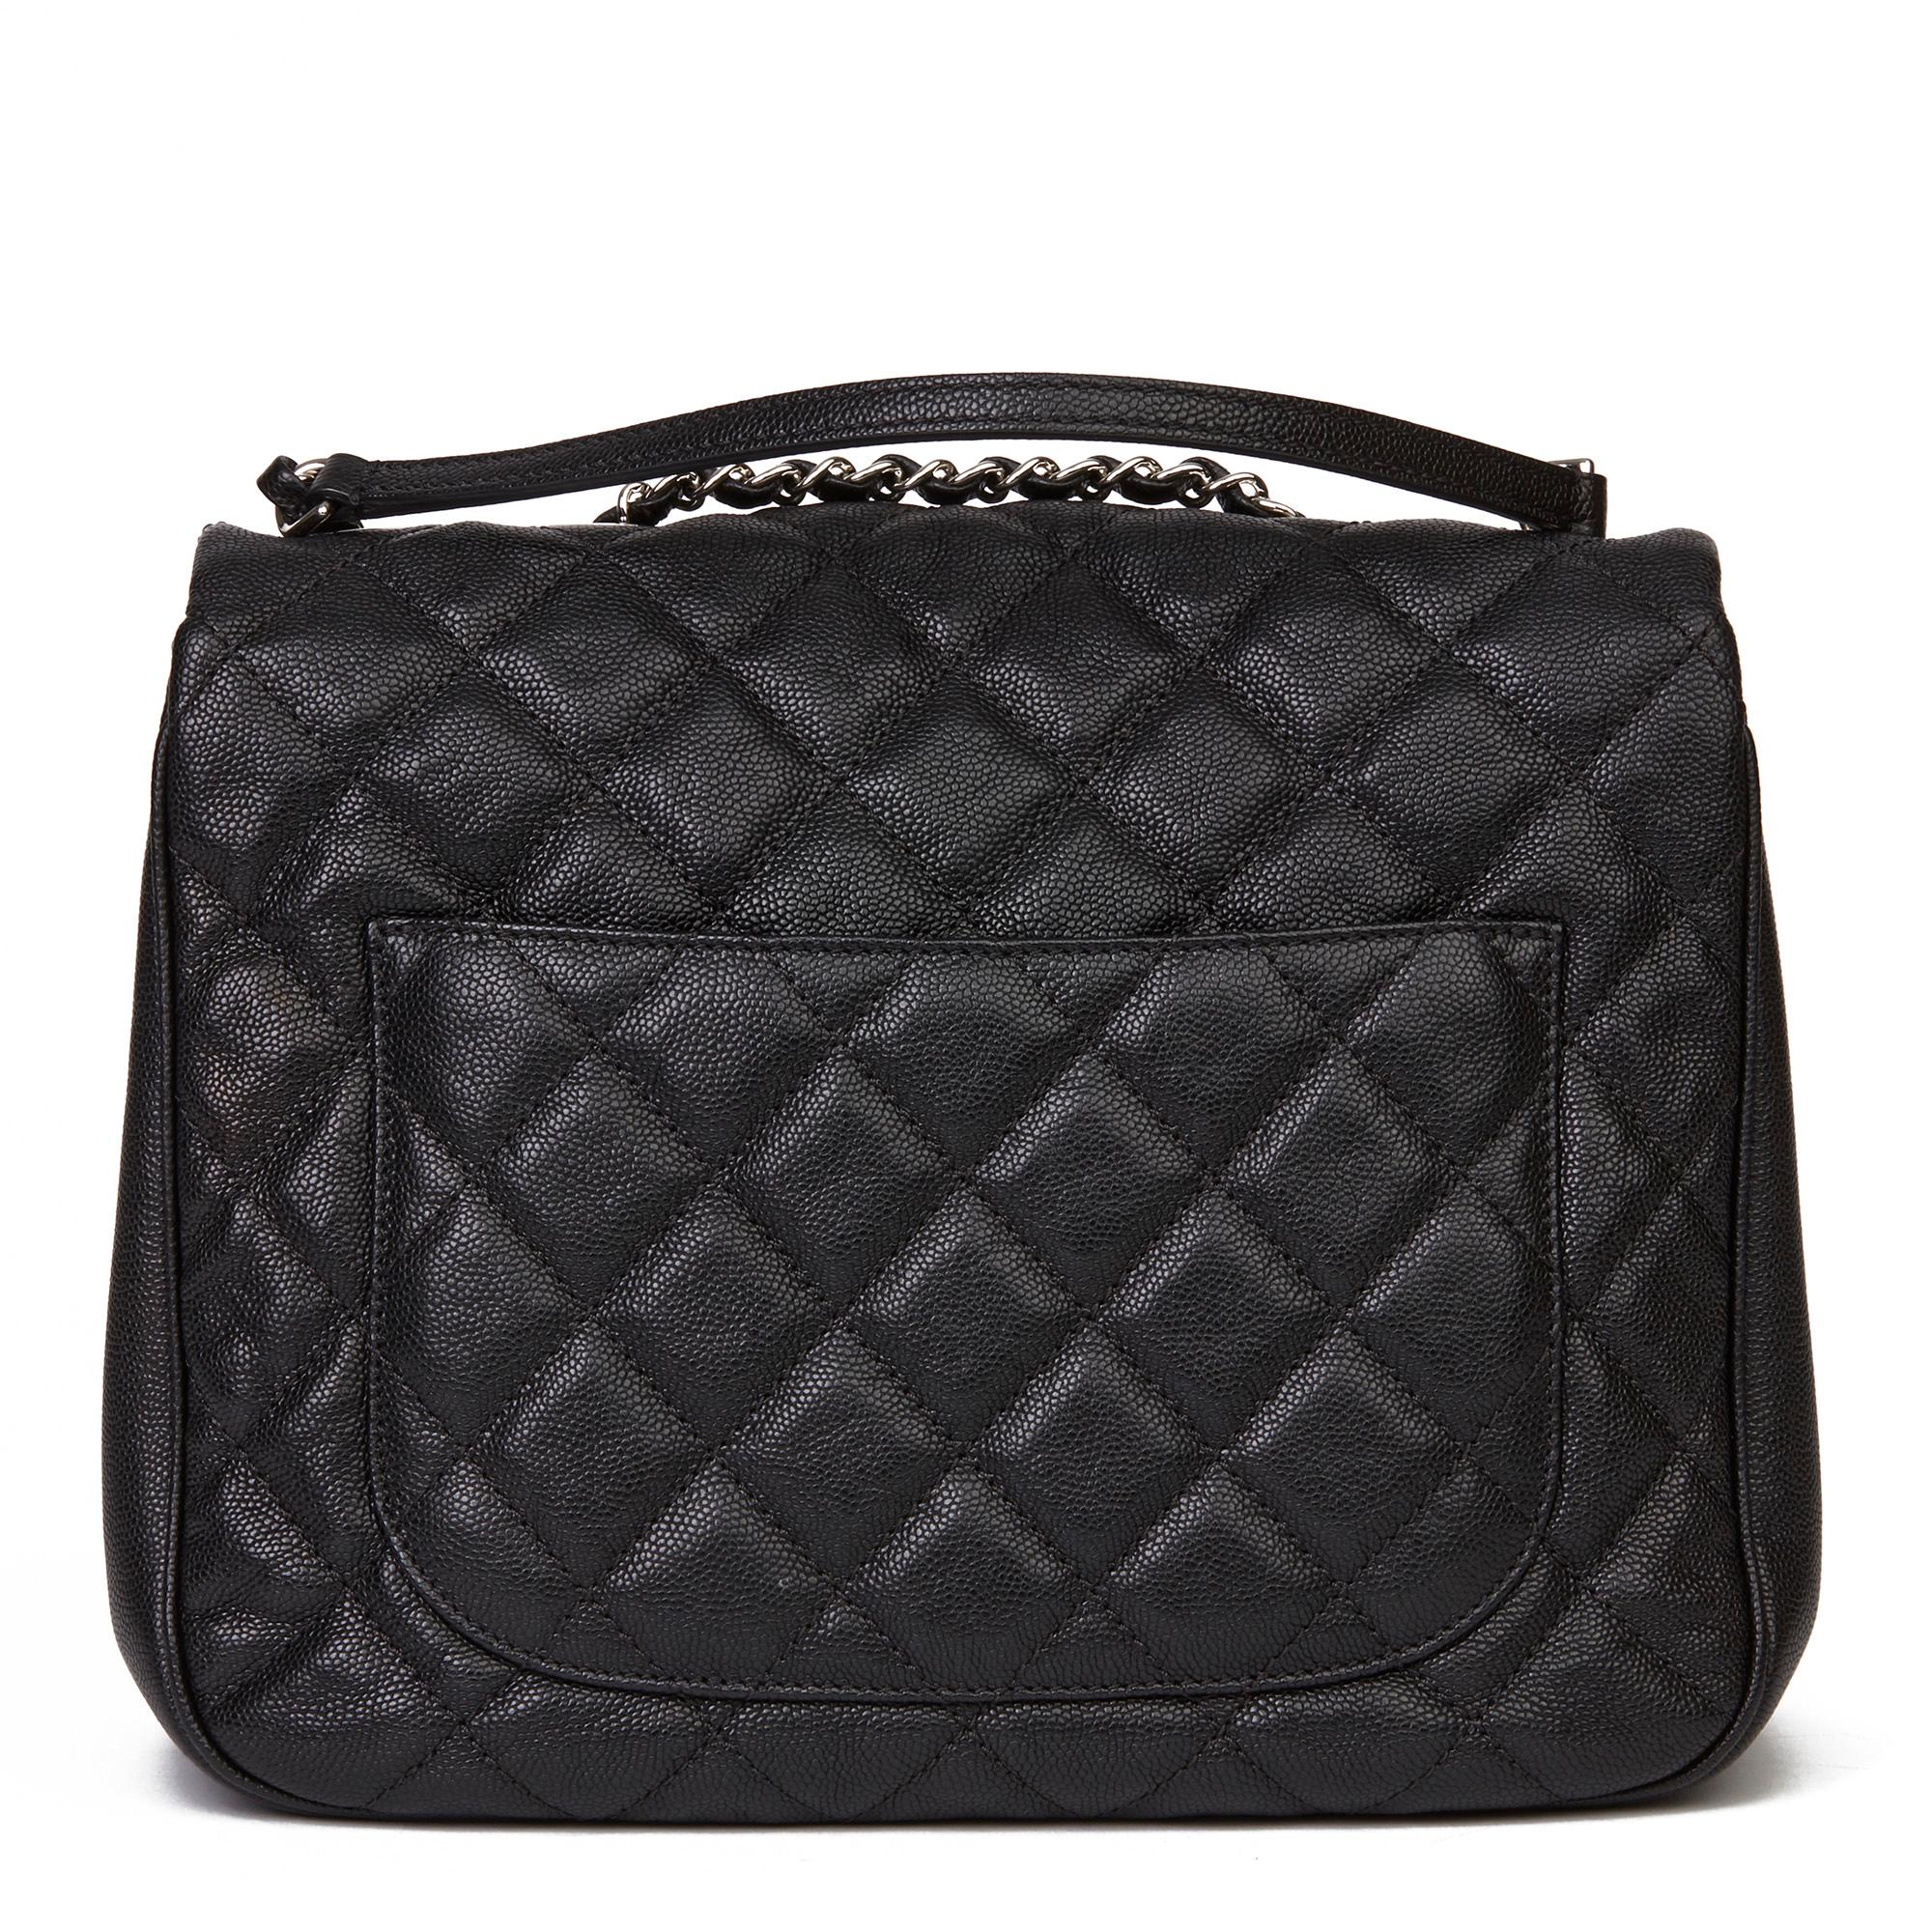 Women's 2019 Chanel Black Quilted Caviar Leather Urban Companion Flap Bag  